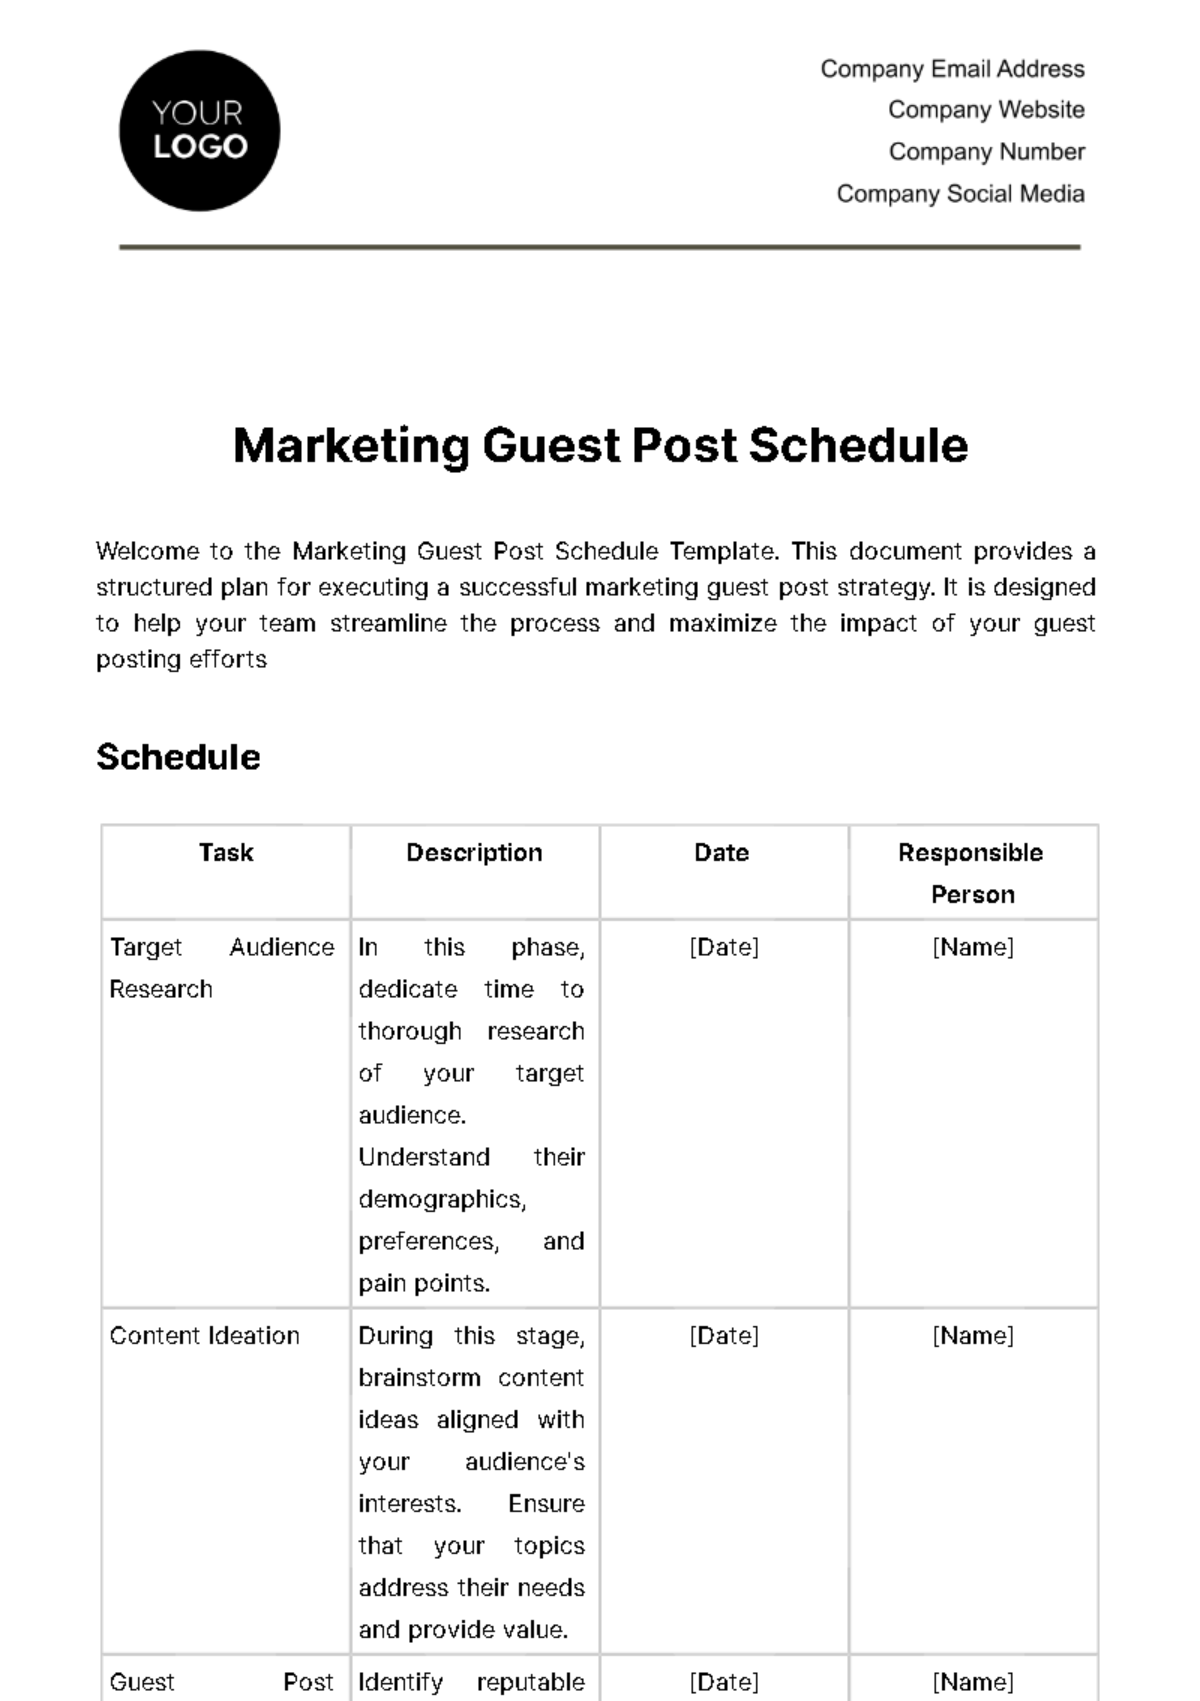 Free Marketing Guest Post Schedule Template